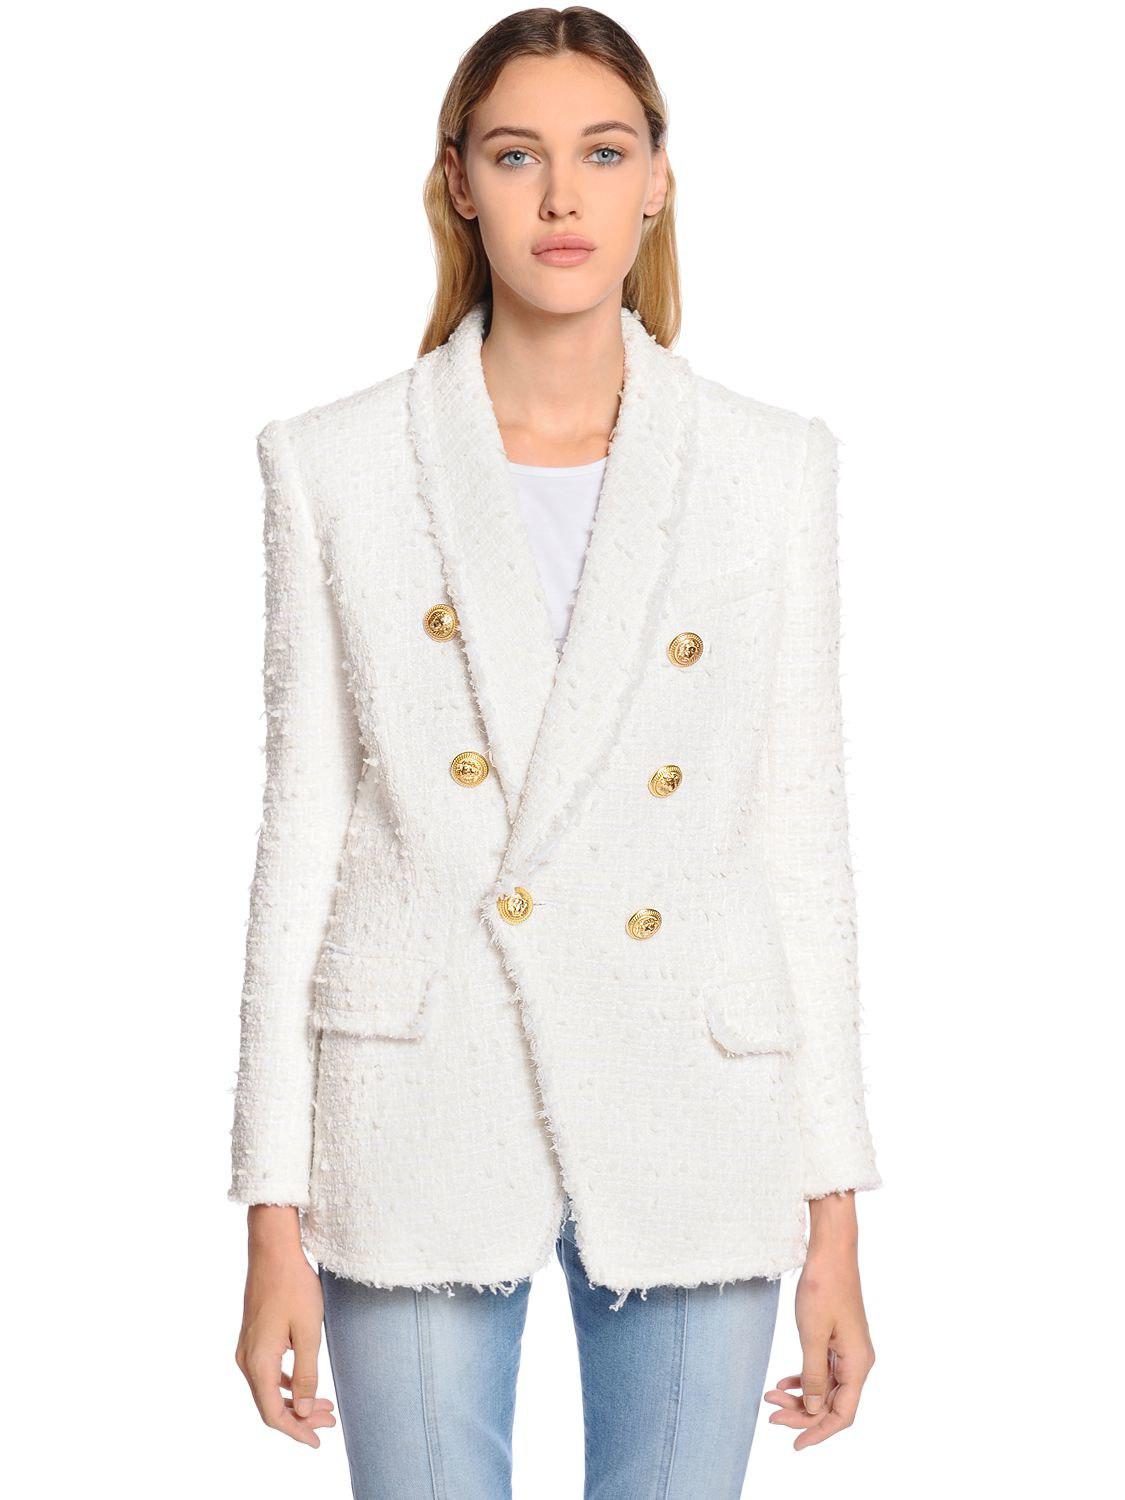 Balmain Double Breasted Fringed Tweed Blazer in White | Lyst